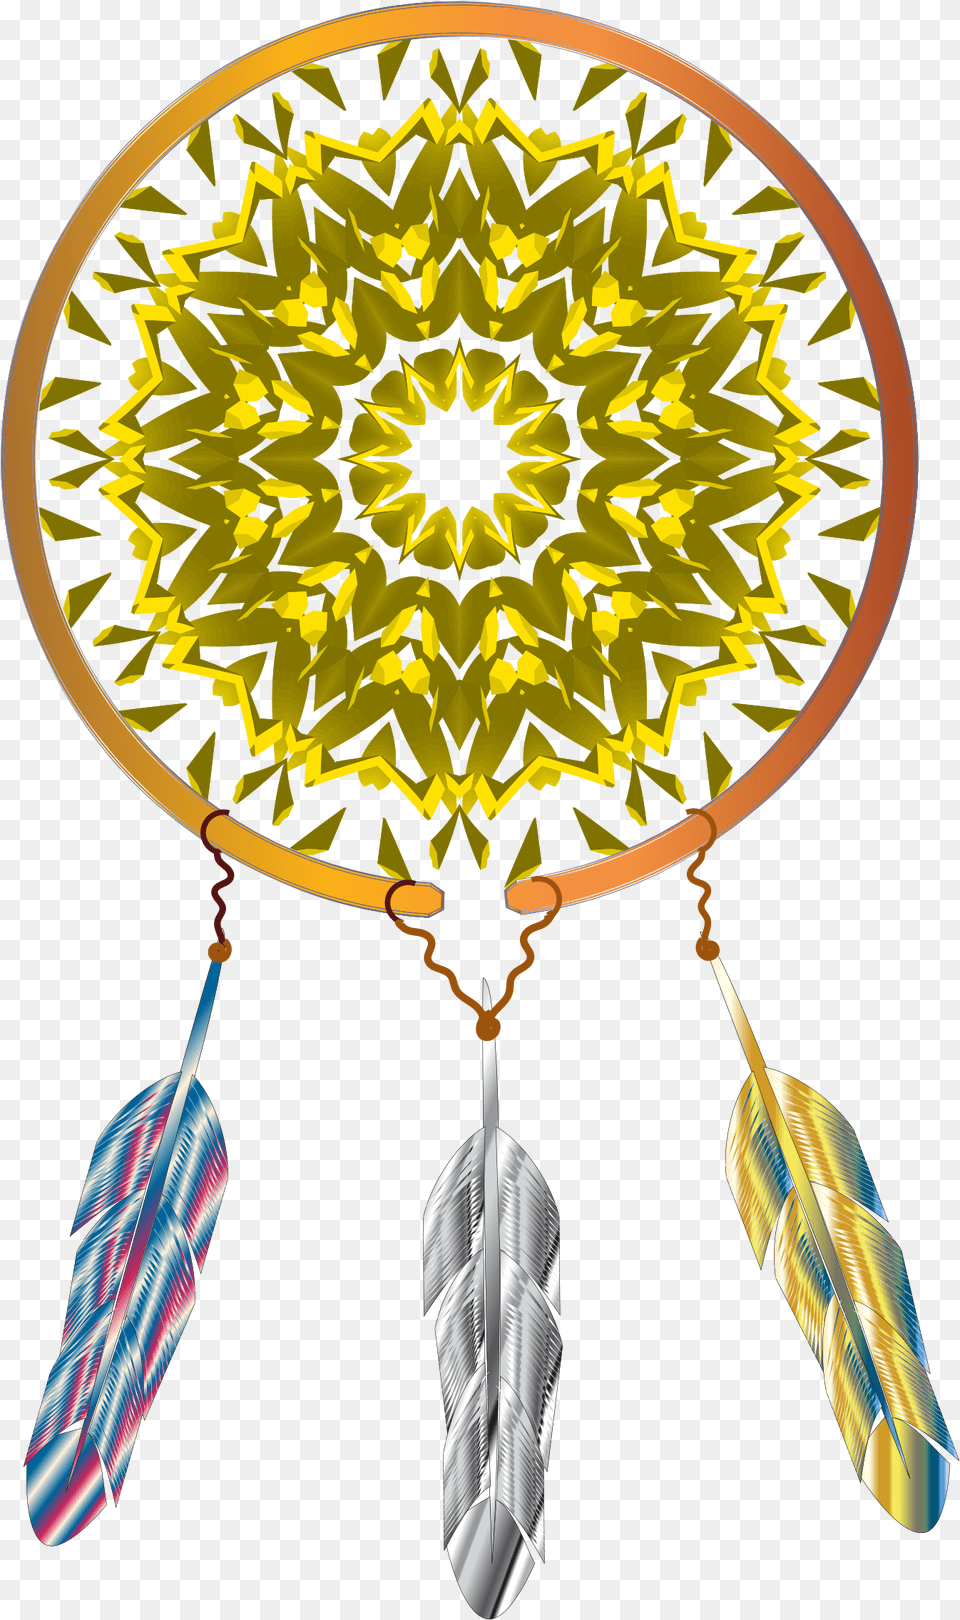 Dreamcatcher Daily Sketch Clip Arts Atg Midpac, Accessories, Earring, Jewelry, Art Png